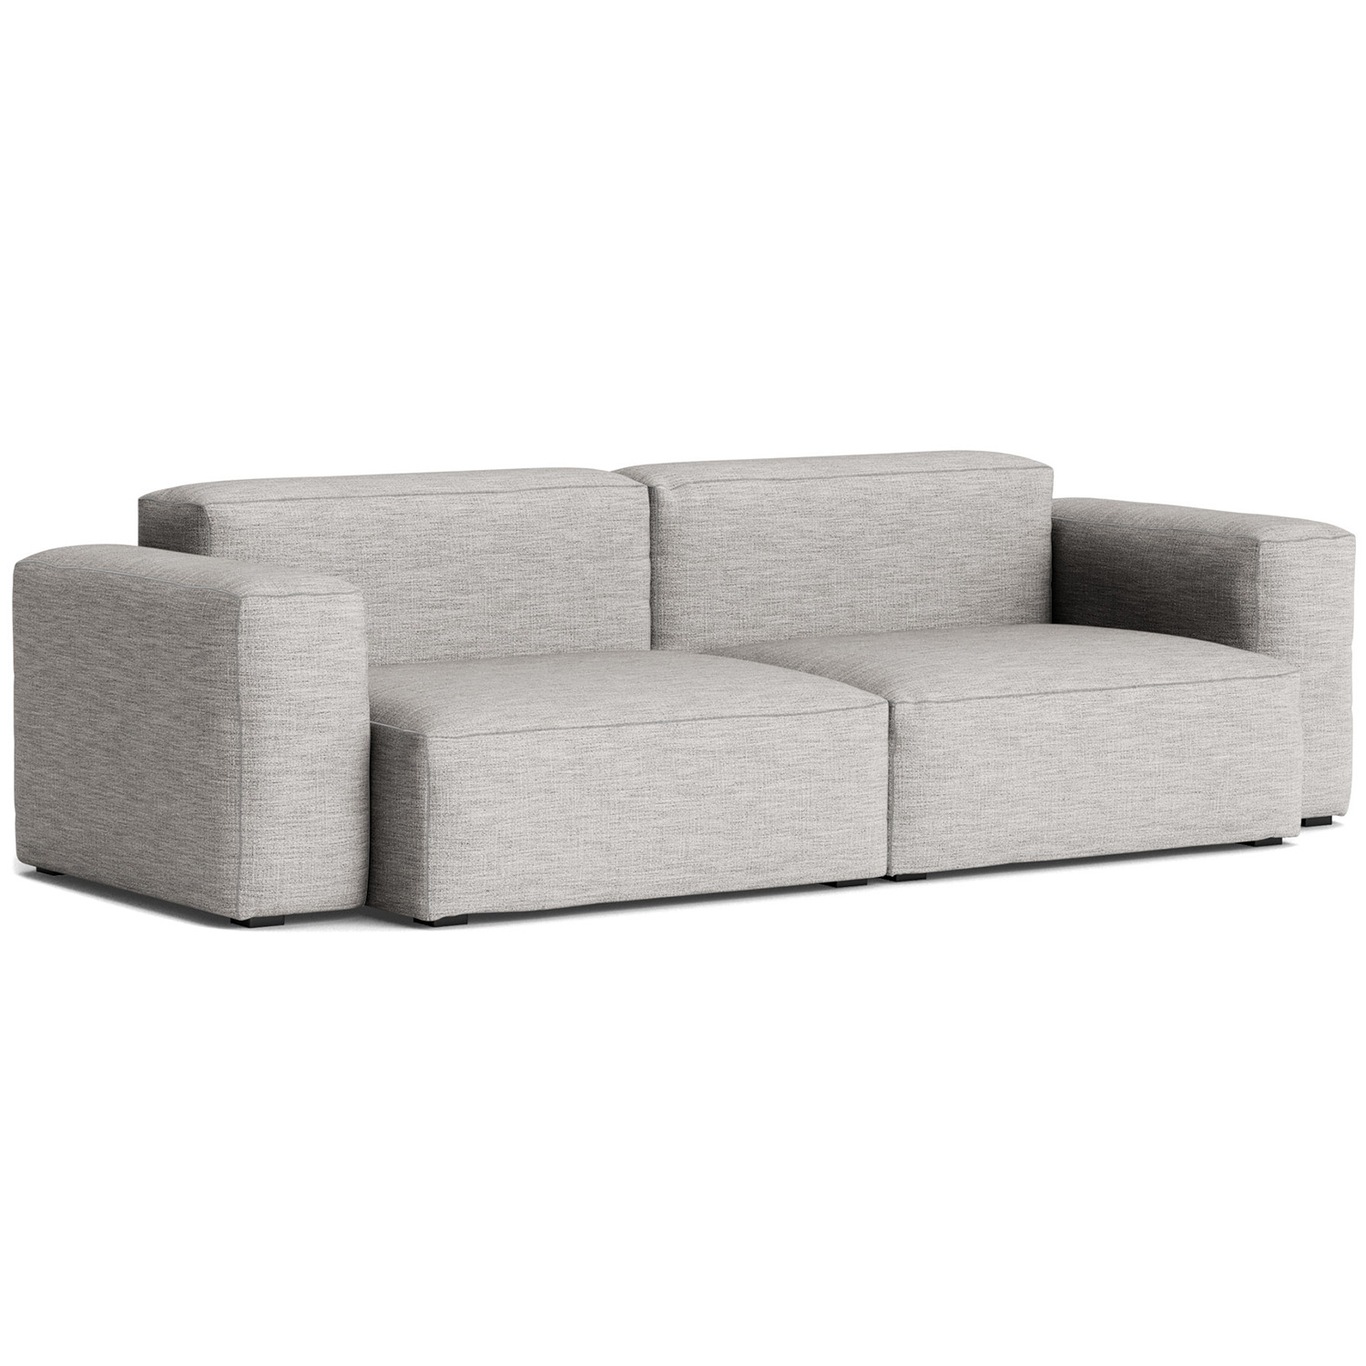 Mags Soft Low 2,5-personers Sofa Comb. 1, Ruskin 33 / Lysegrå Syning